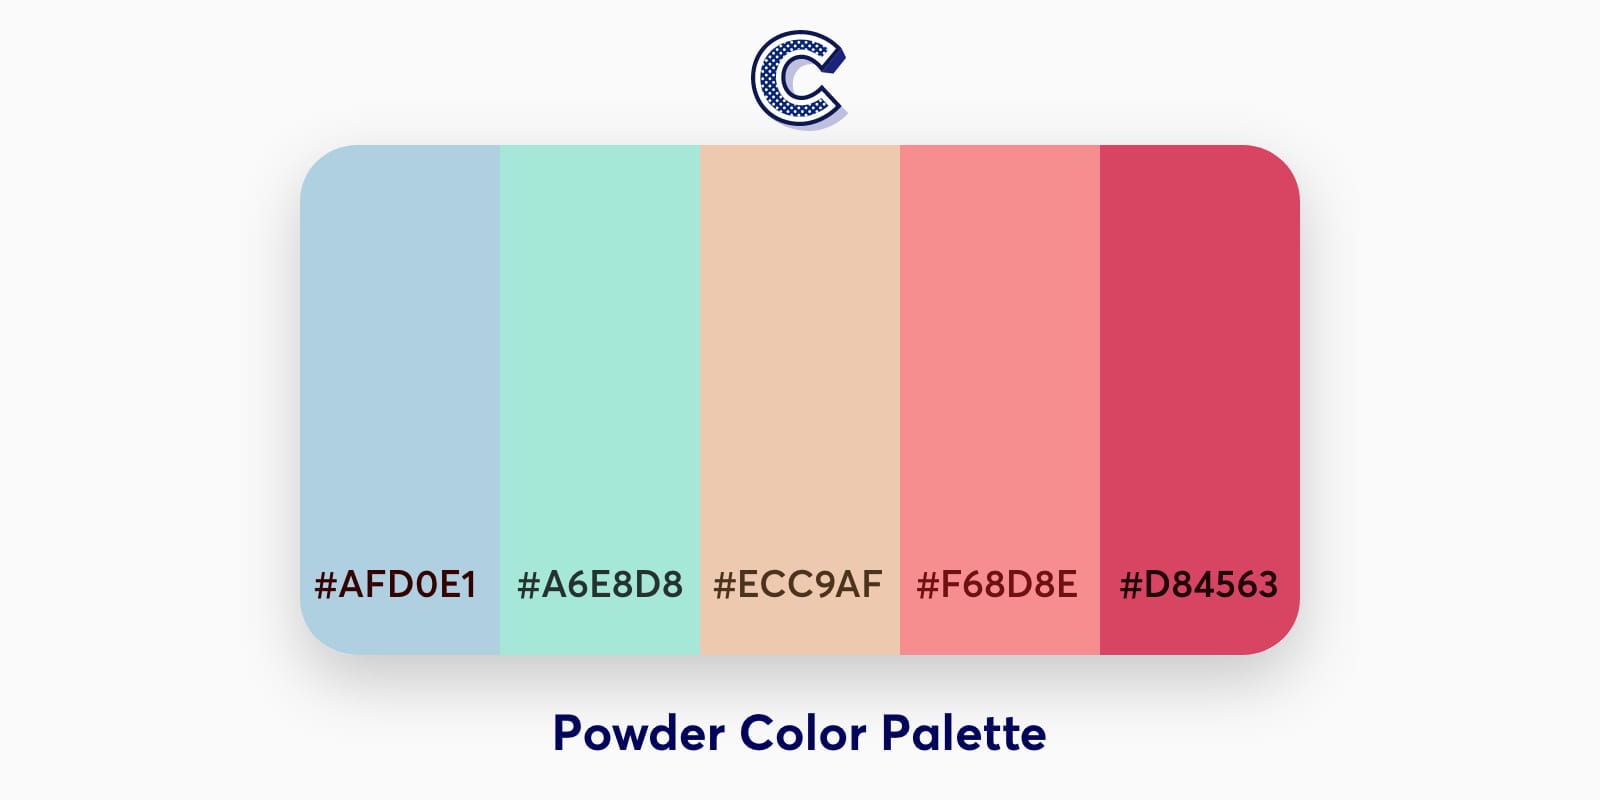 the featured image of powder color palette